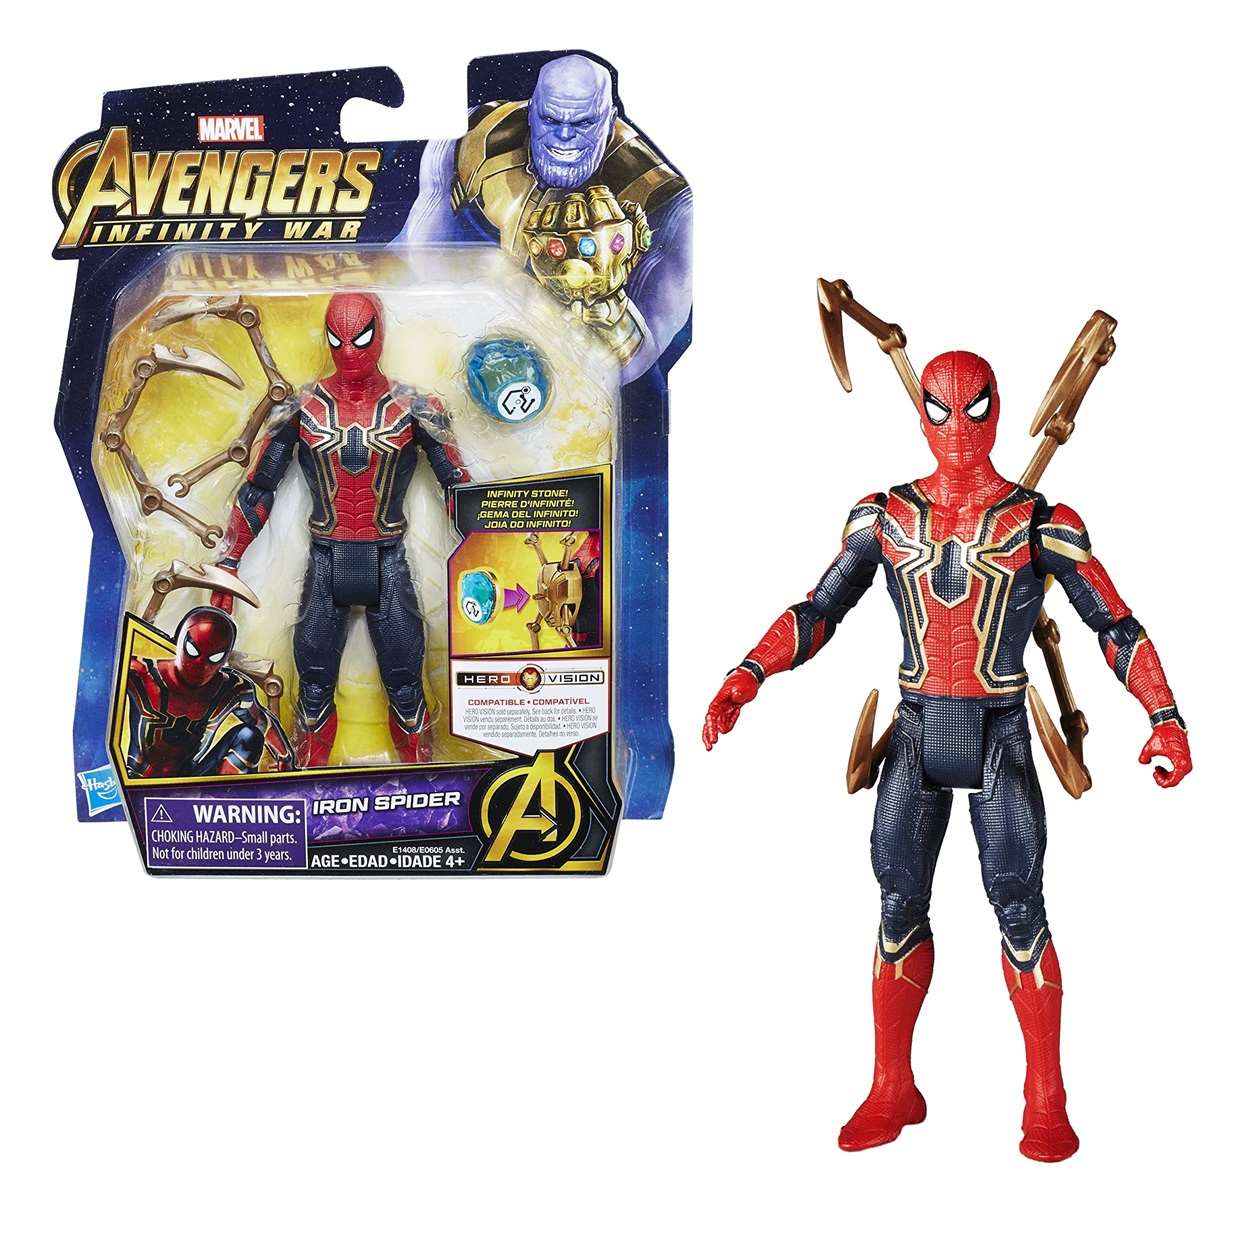 Pack Iron Spider End Game + Iron Spider Infinity War 6 PuLG  Cilindro Gratis!!